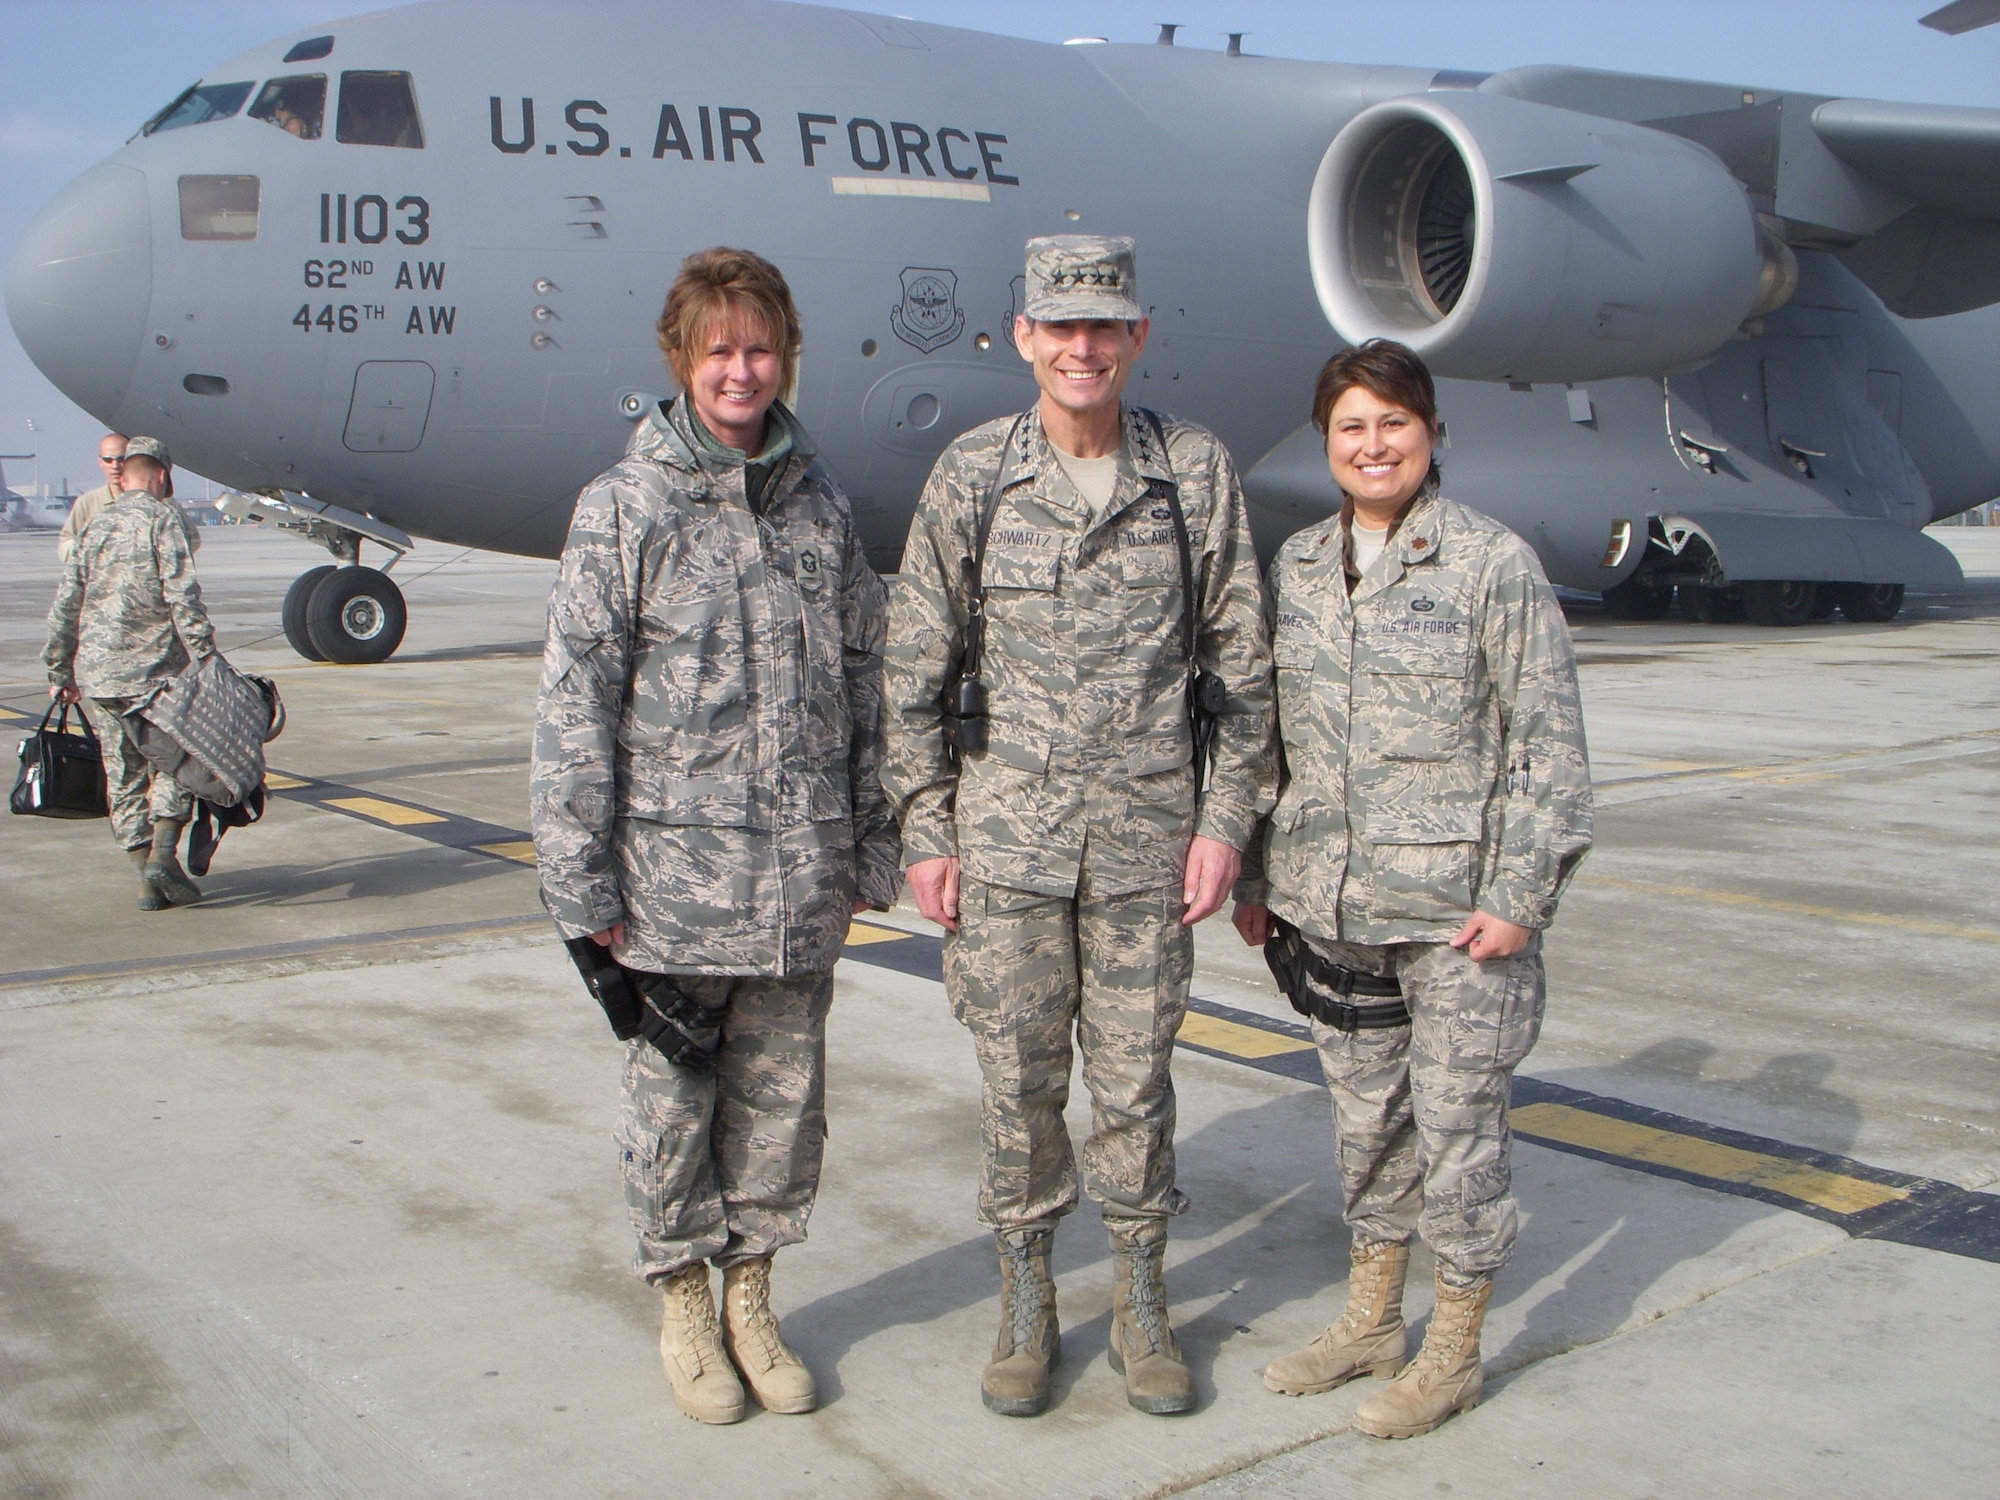 Chief Master Sgt. Milissa Fowler, (left) 153rd Airlift Wing, Force Support Squadron superintendent, and Maj. Nicole Chavez (right), meet Gen. Norton Schwartz, (center) then Chief of Staff of the Air Force, during their support of Operation Enduring Freedom in 2009 where they assisted with protocol. (Courtesy photo)